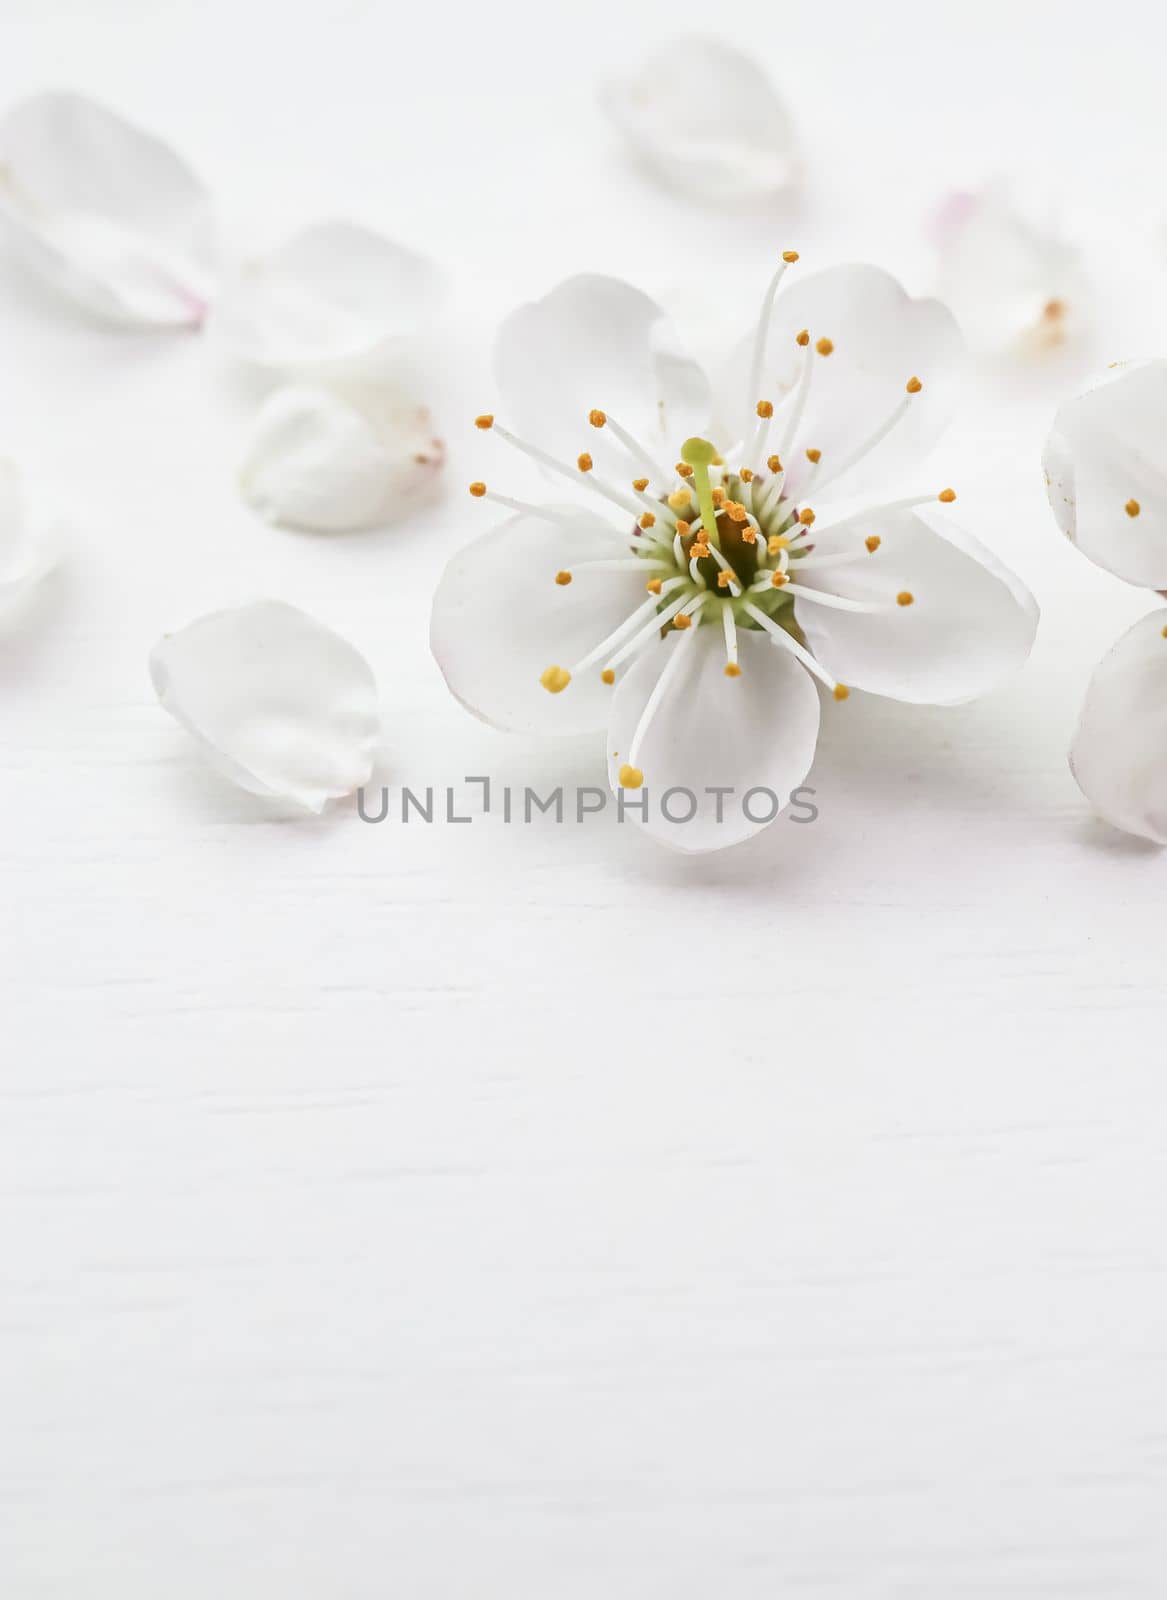 Cherry or plum flower with petals on a white background.